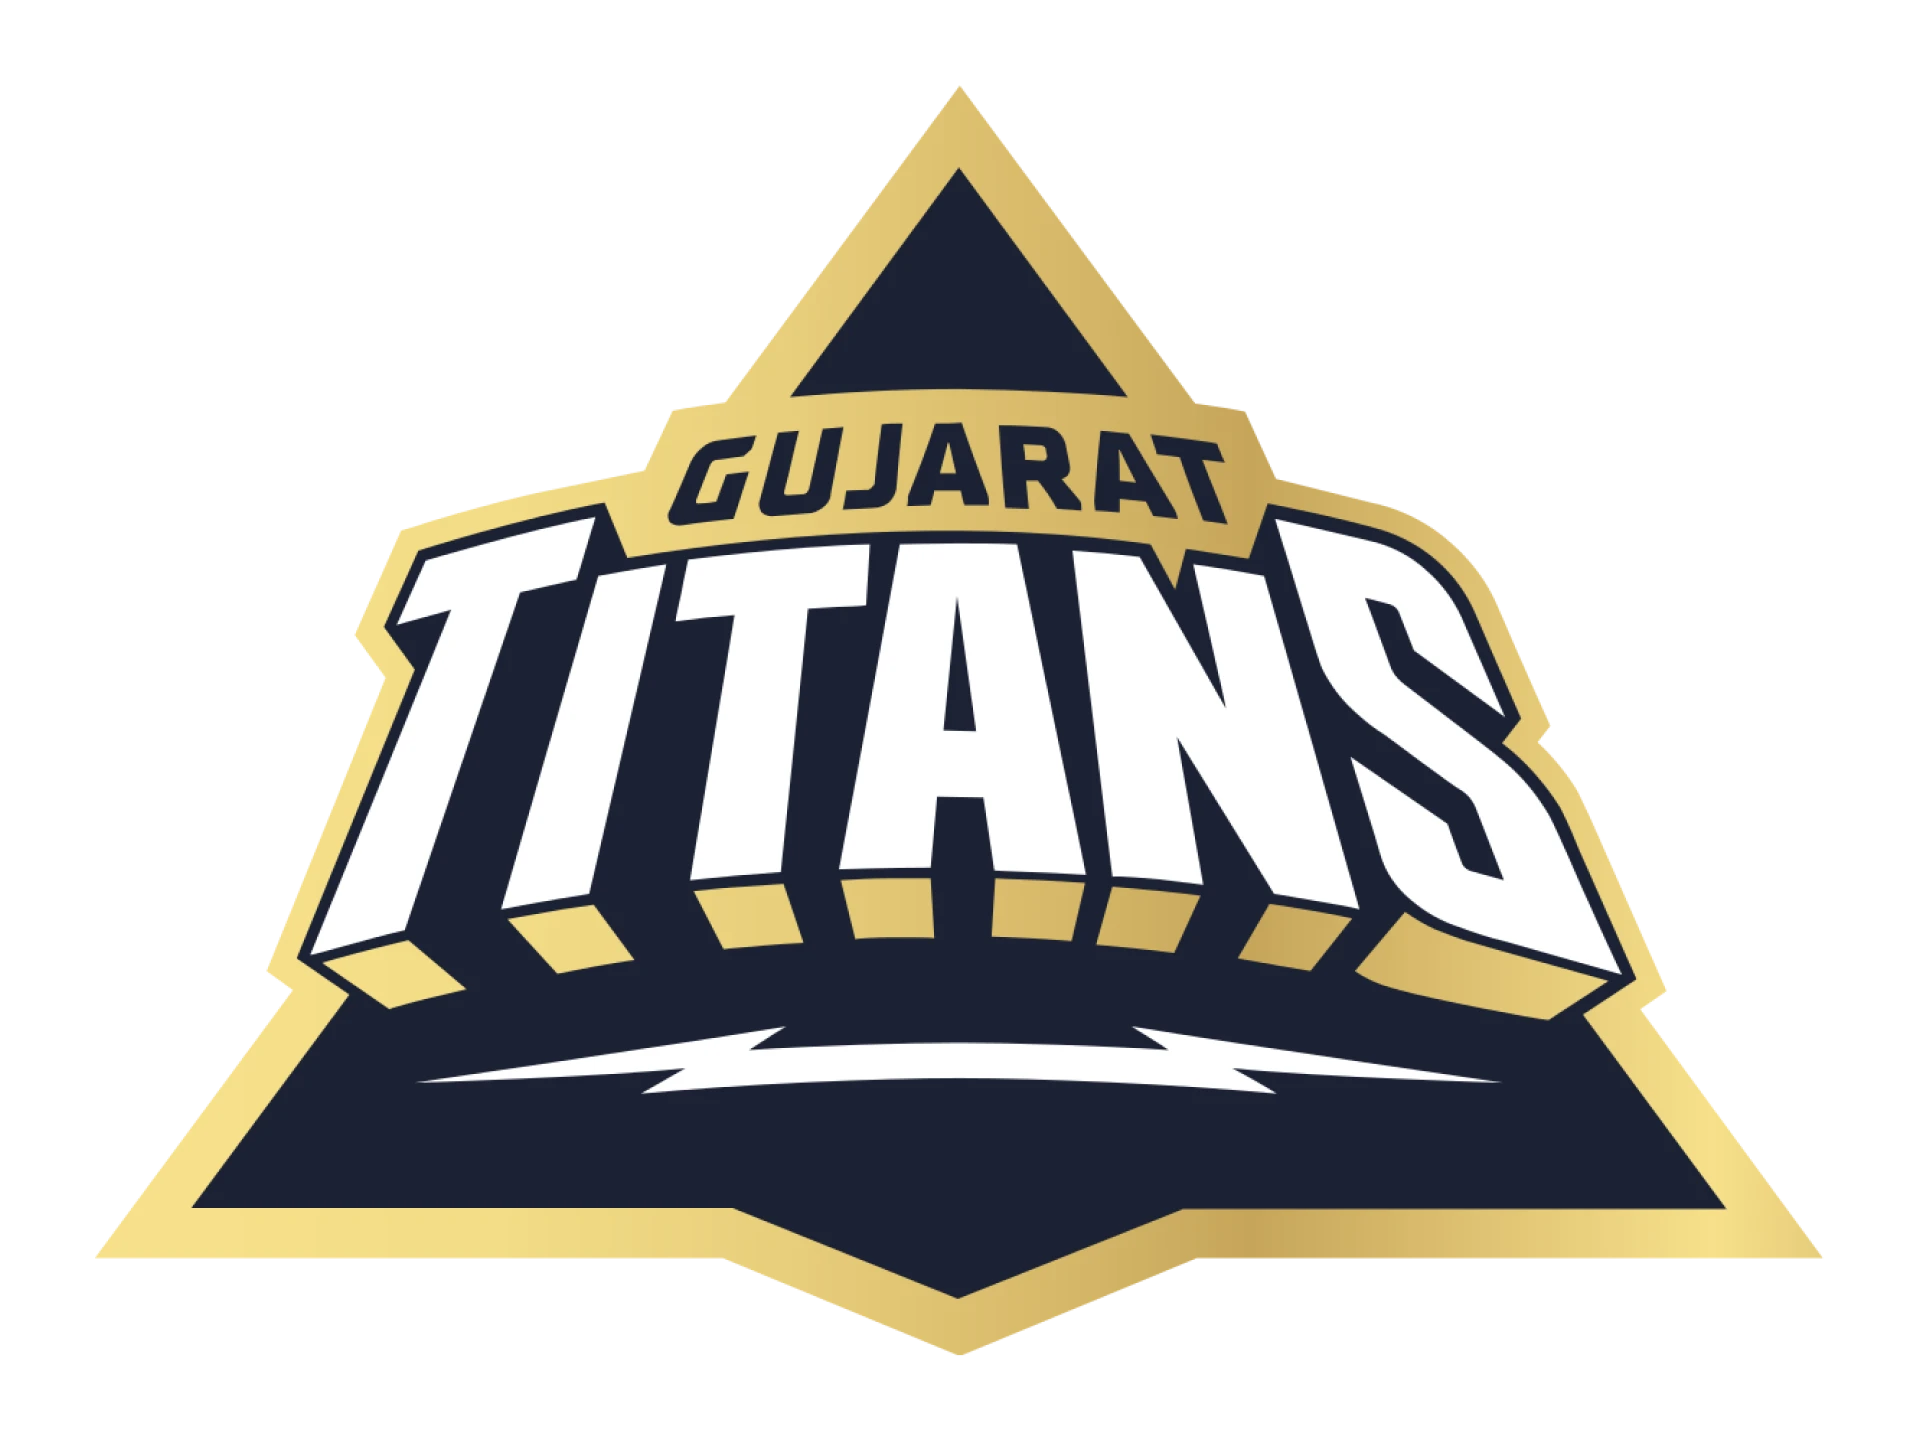 Gujarat Titans is a new team with great potential to win the IPL, try betting on them.